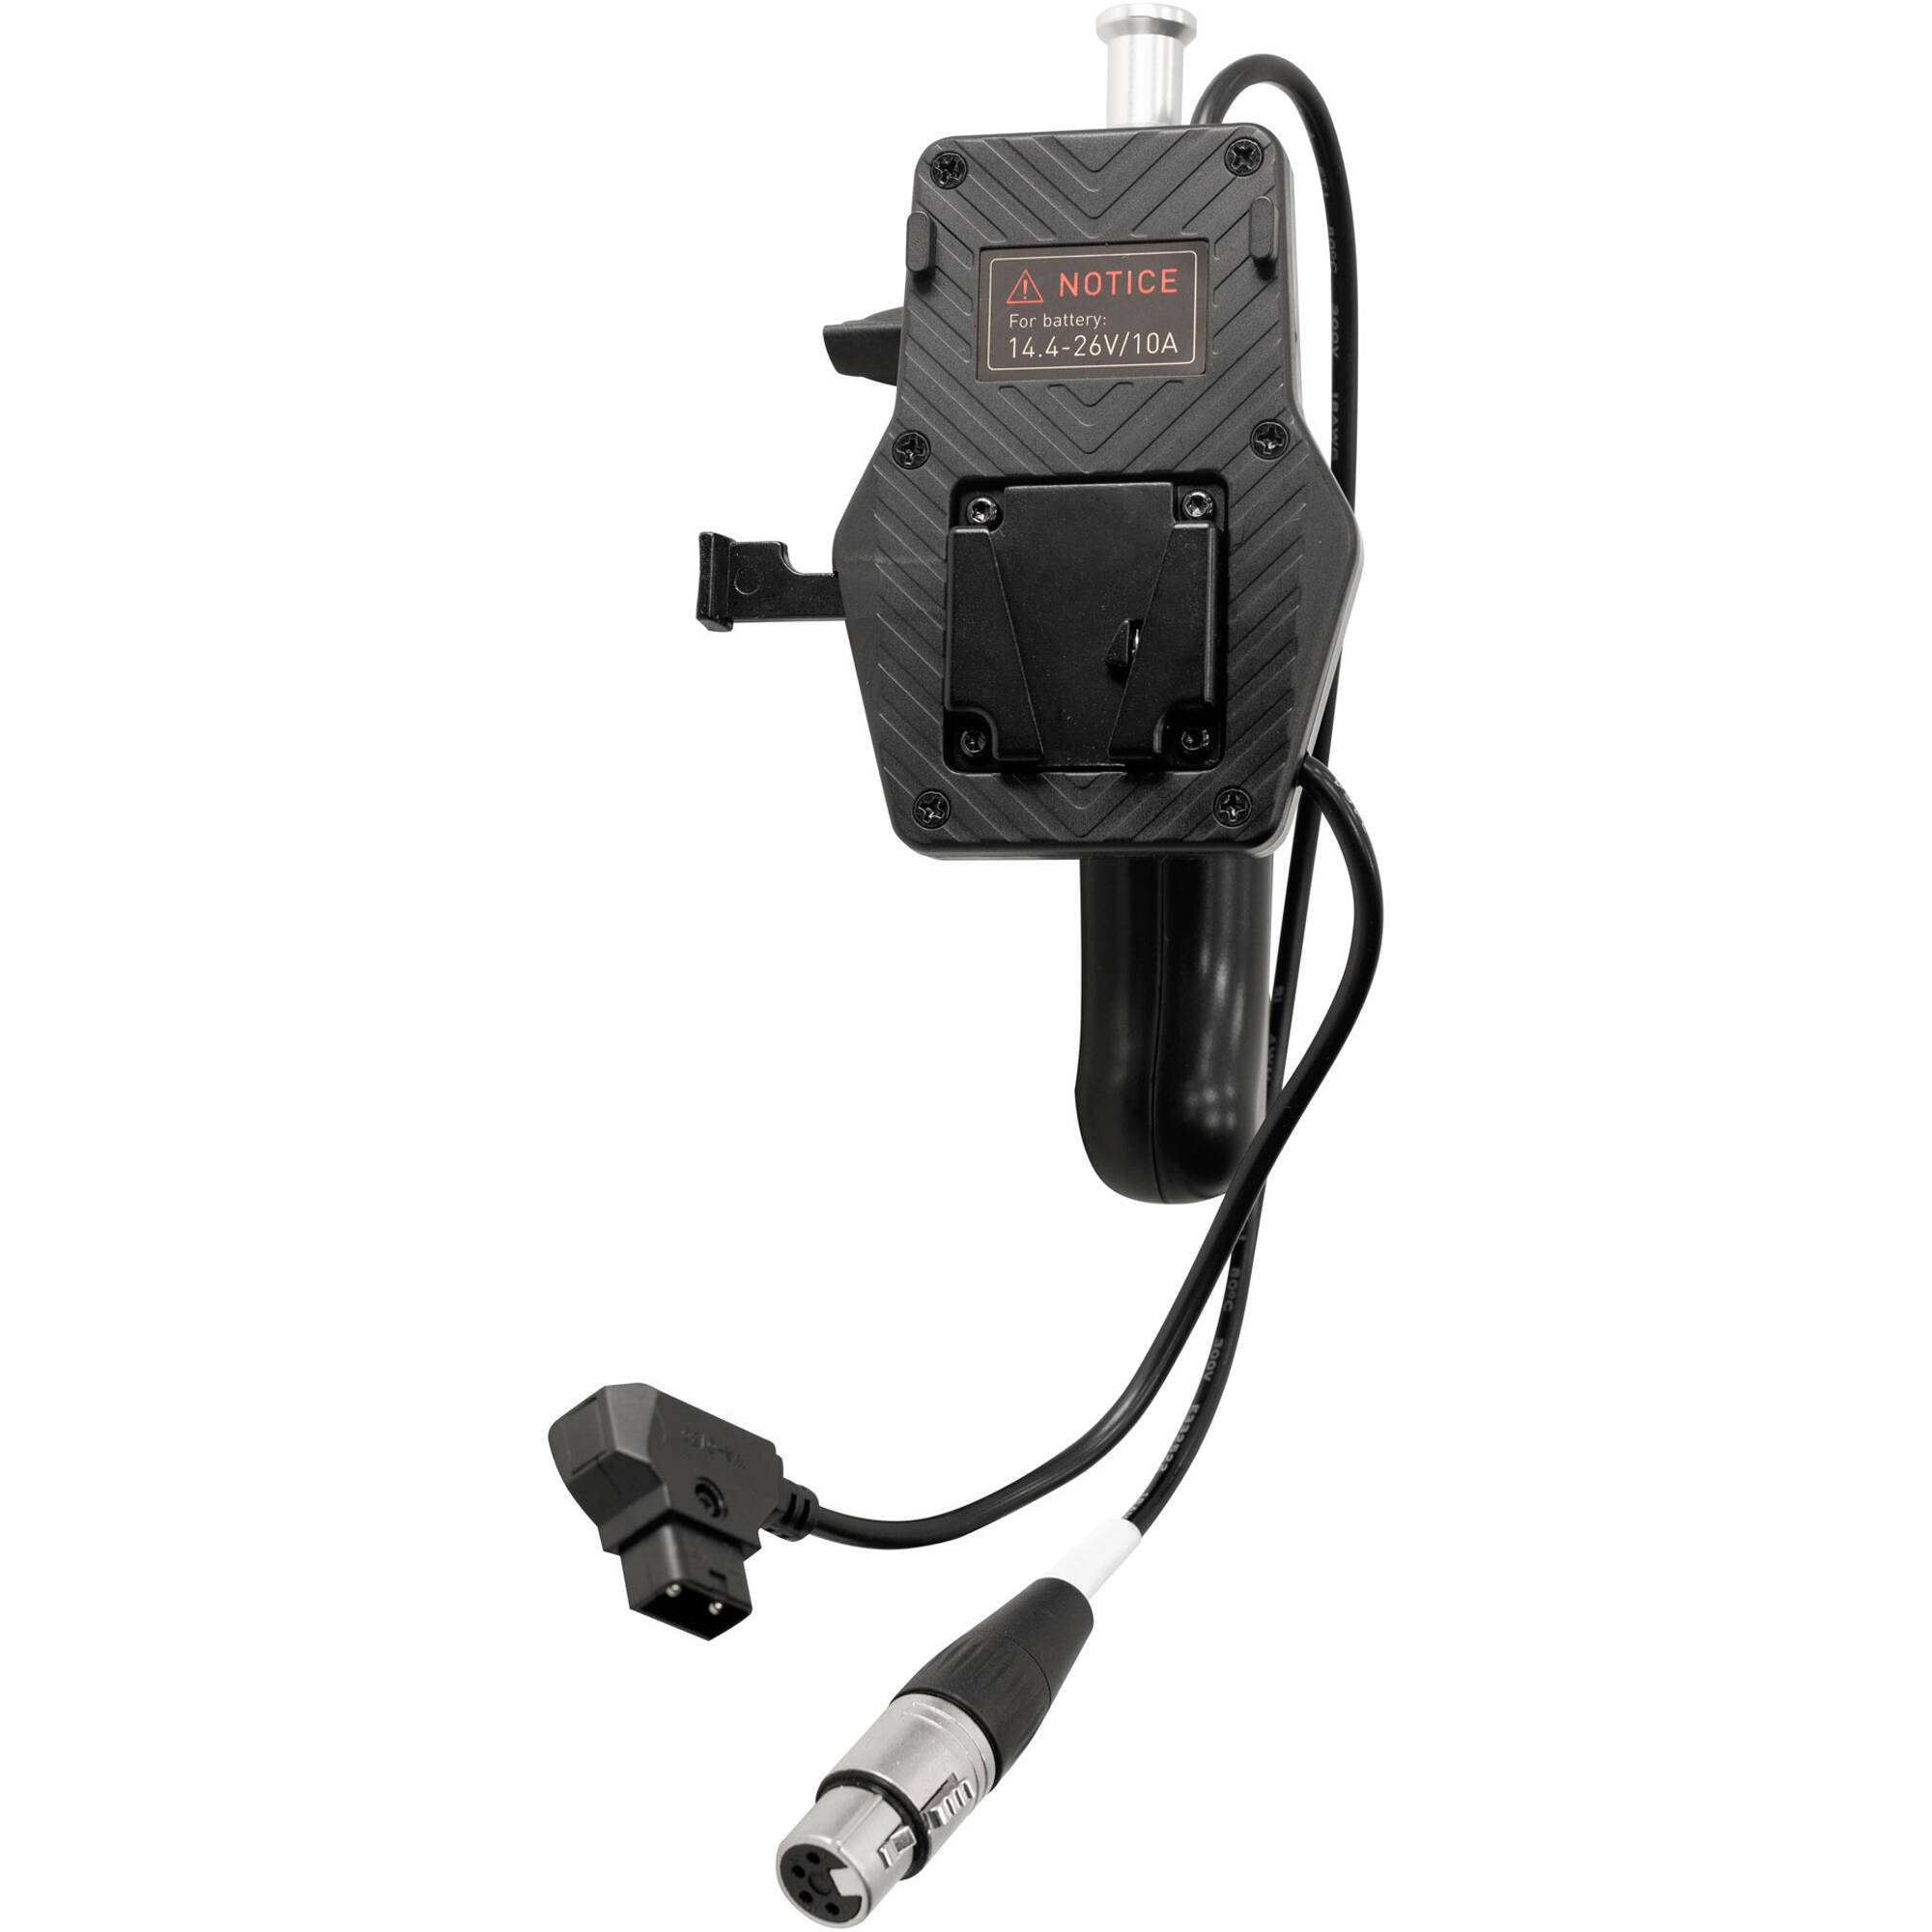 Nanlite V-Mount Battery Grip with 4-Pin XLR Connector for Forza 150